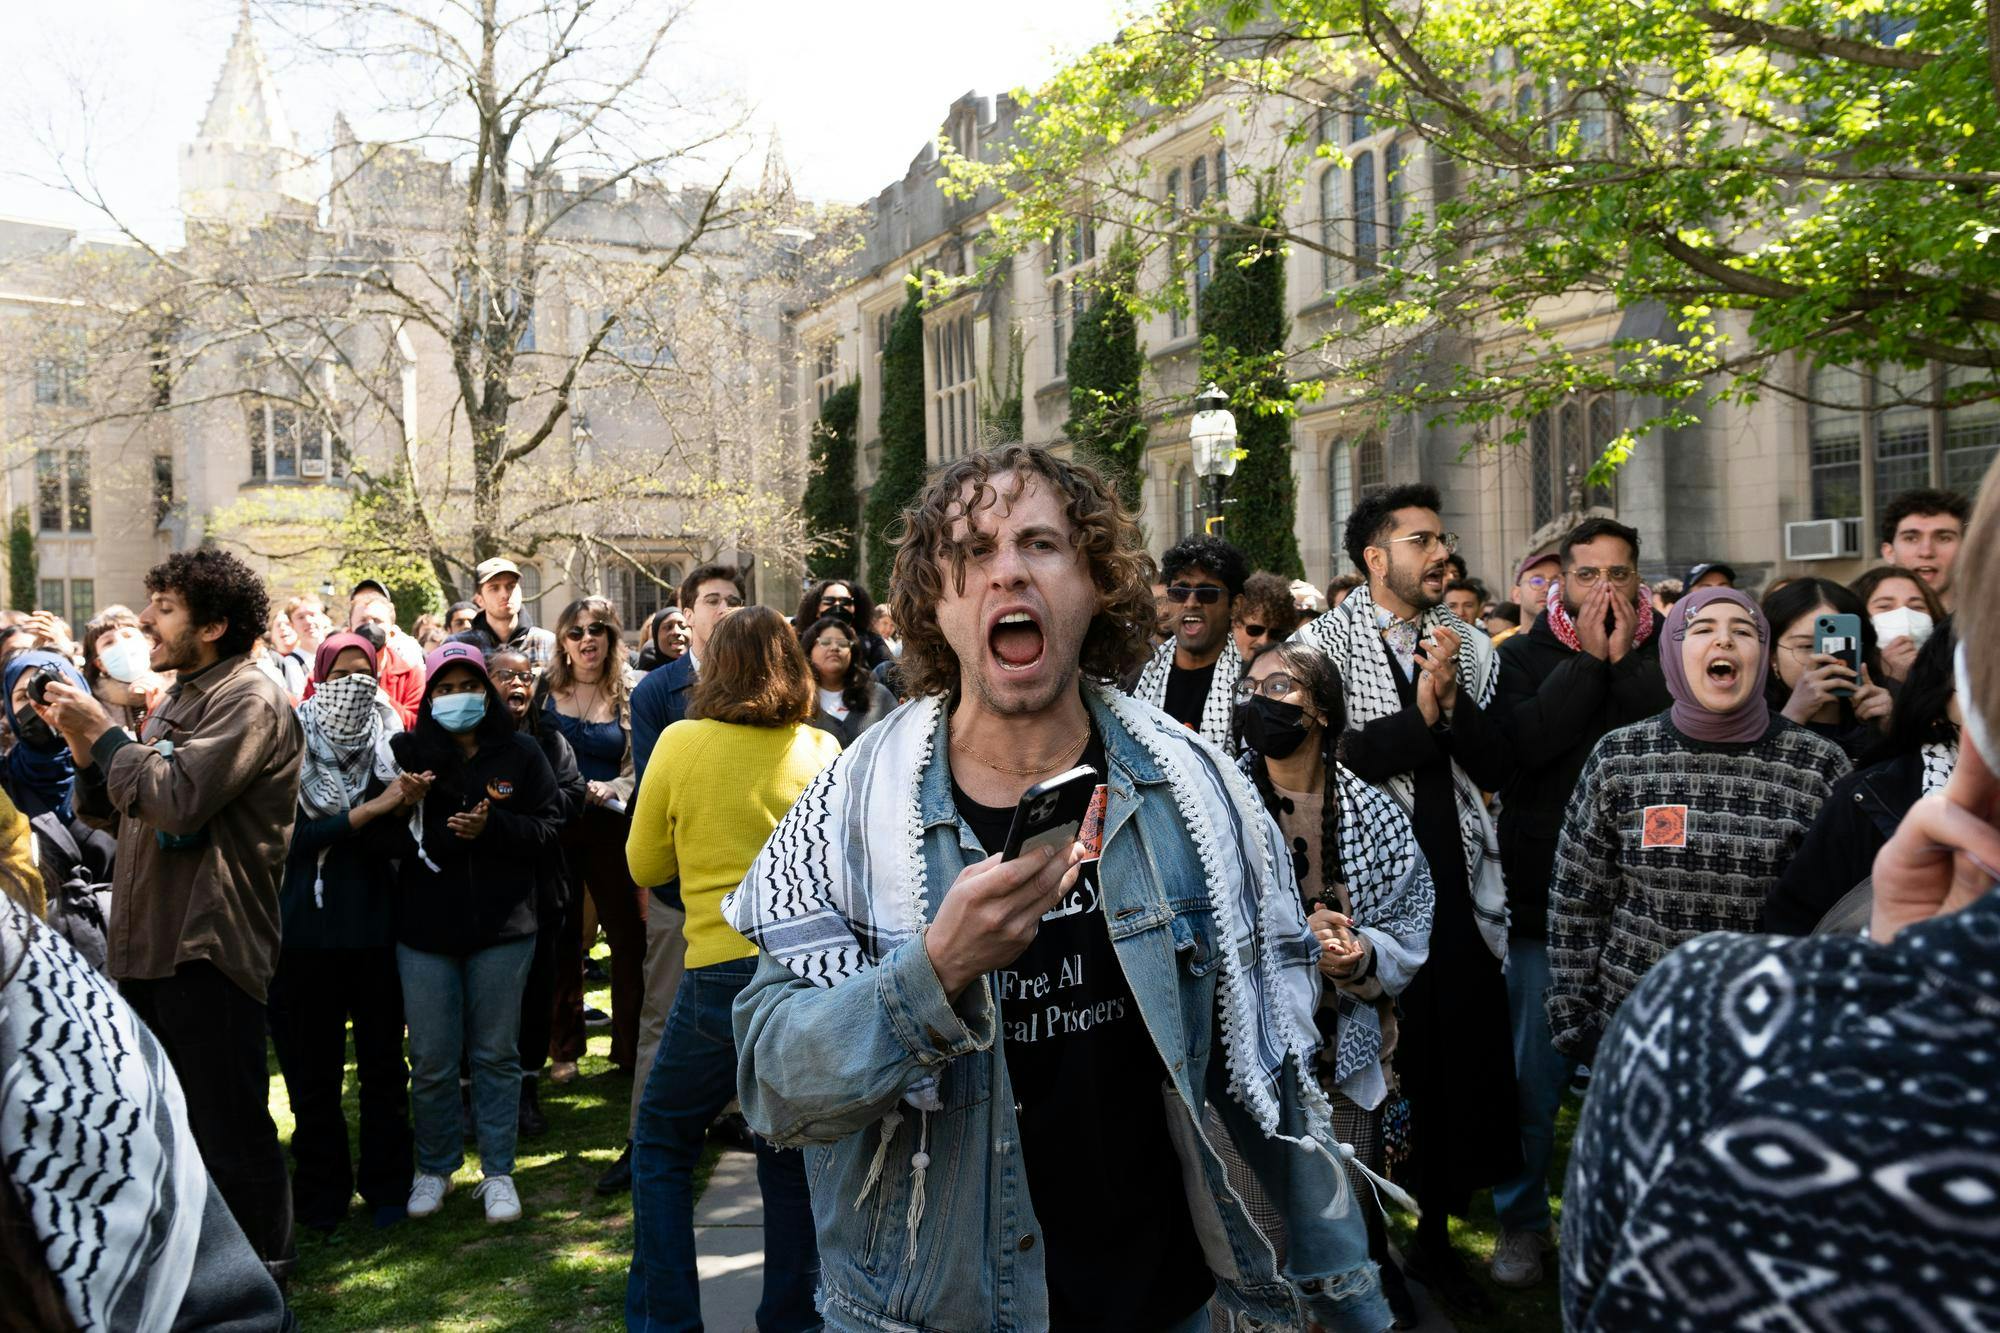 A man shouts from the center of a large crowd